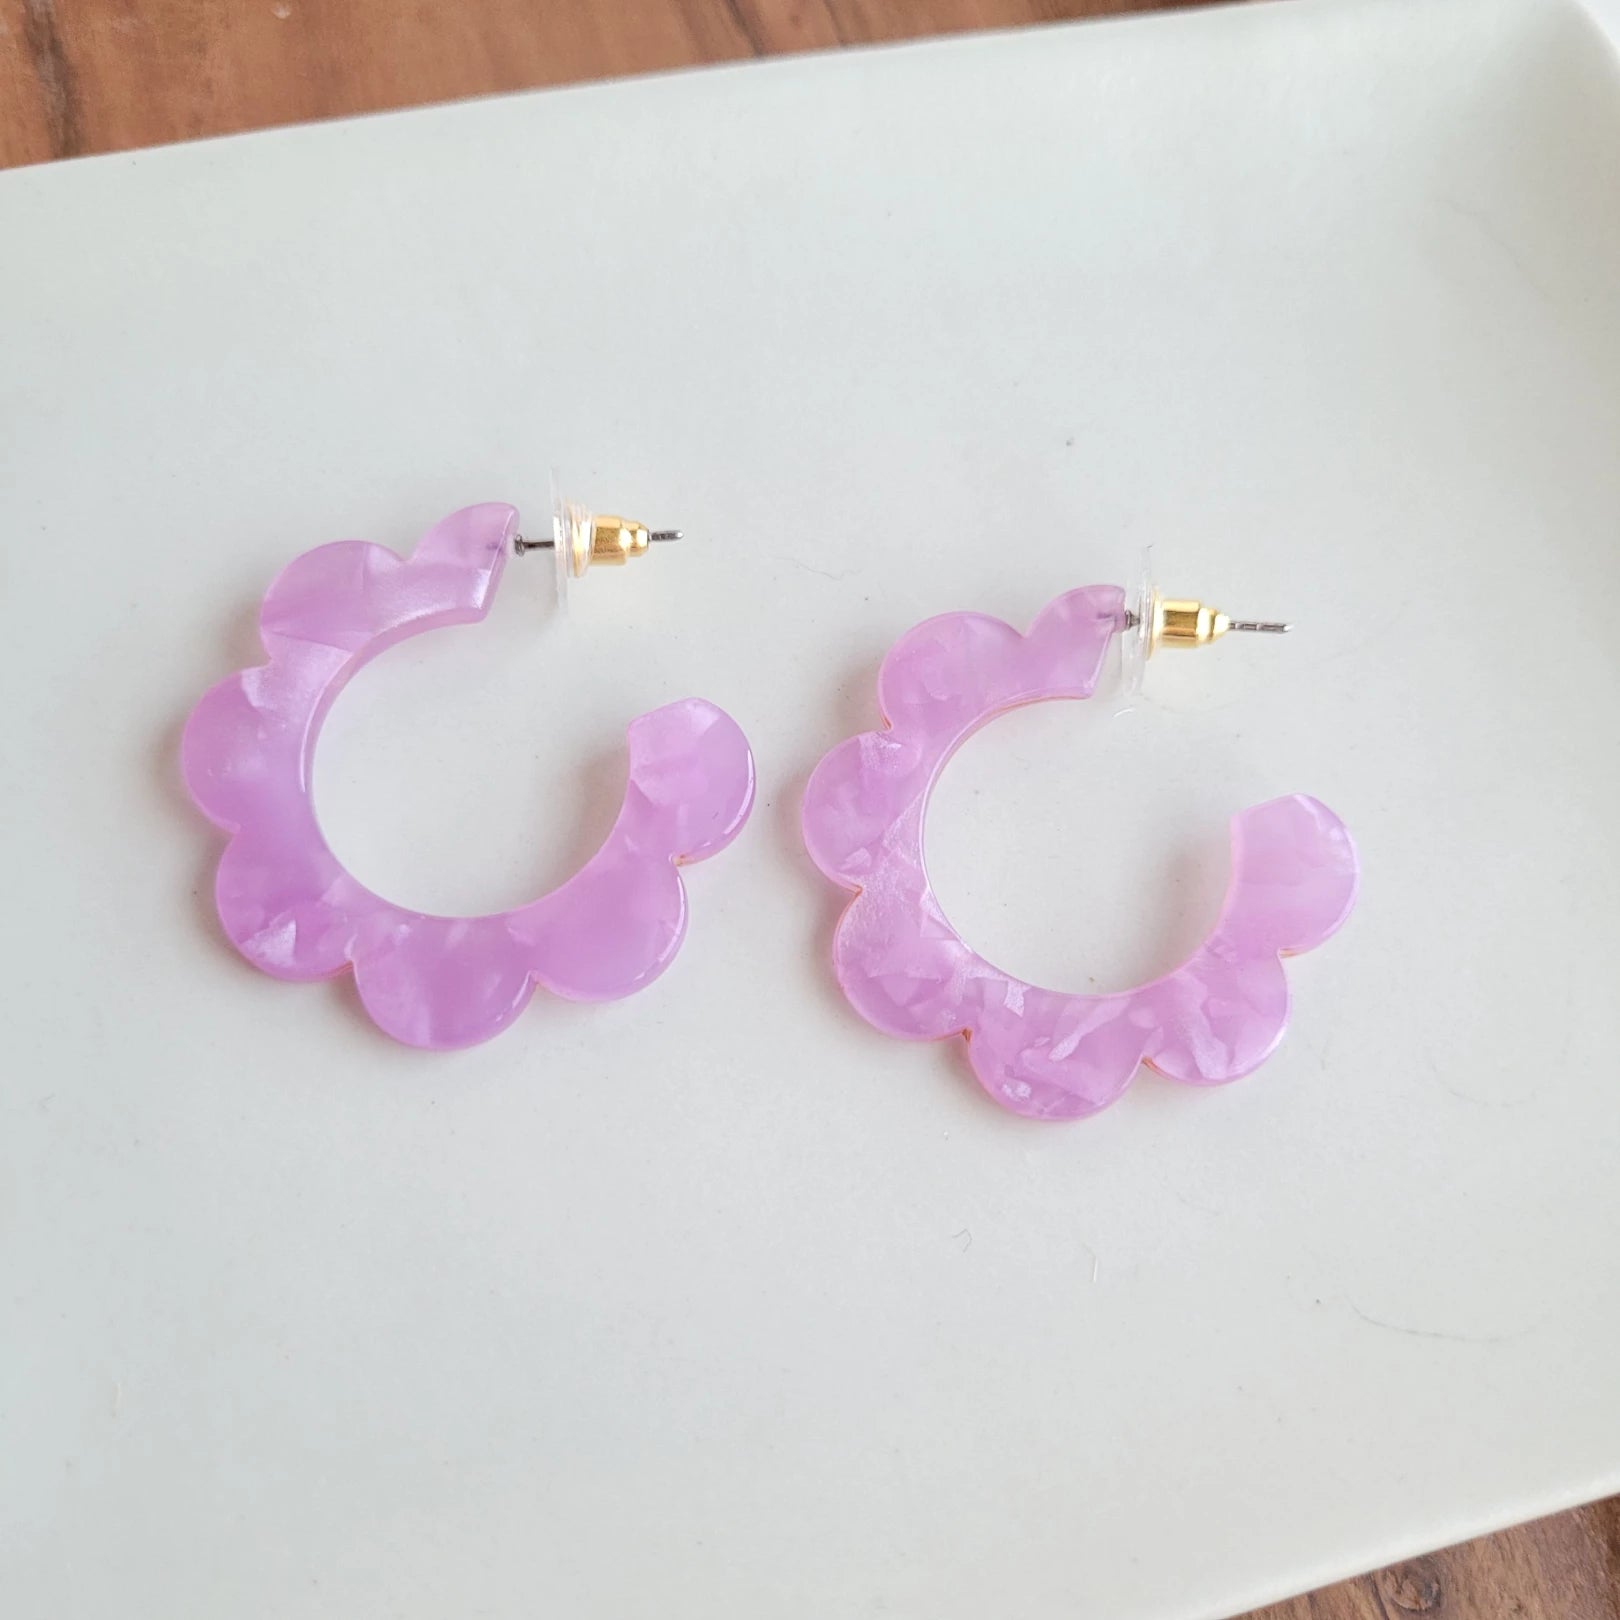 Add a retro vibe to your outfit with our Flora Hoops. The floral design gives these earrings a unique, eye-catching look that's sure to turn heads.  Their lightweight design makes them perfect for everyday wear, while the bright colors make them ideal for a fun night out.